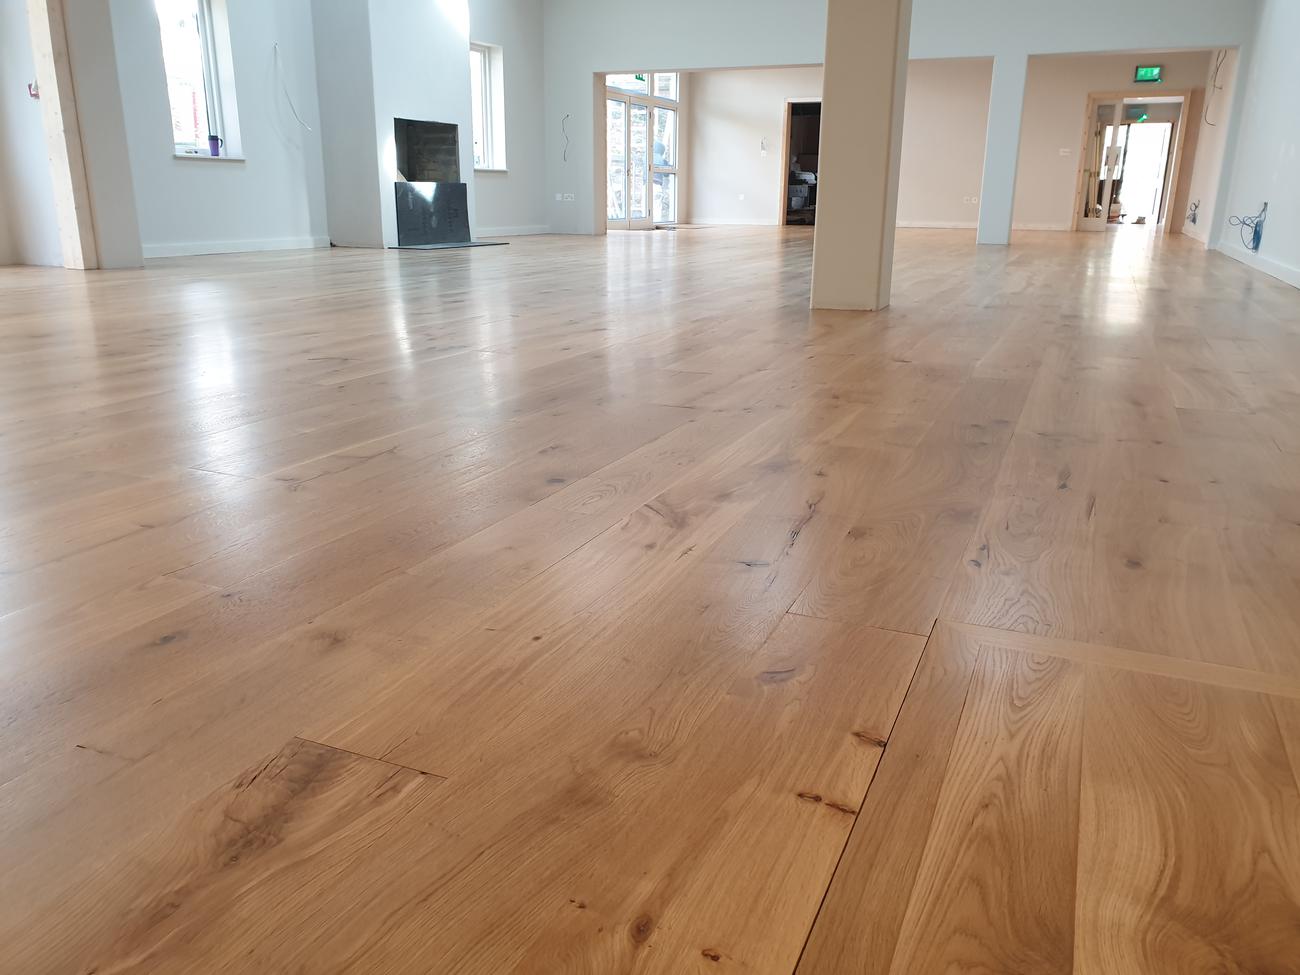 Our Gallery | Floor Fitters in Bristol | JCT Flooring gallery image 29